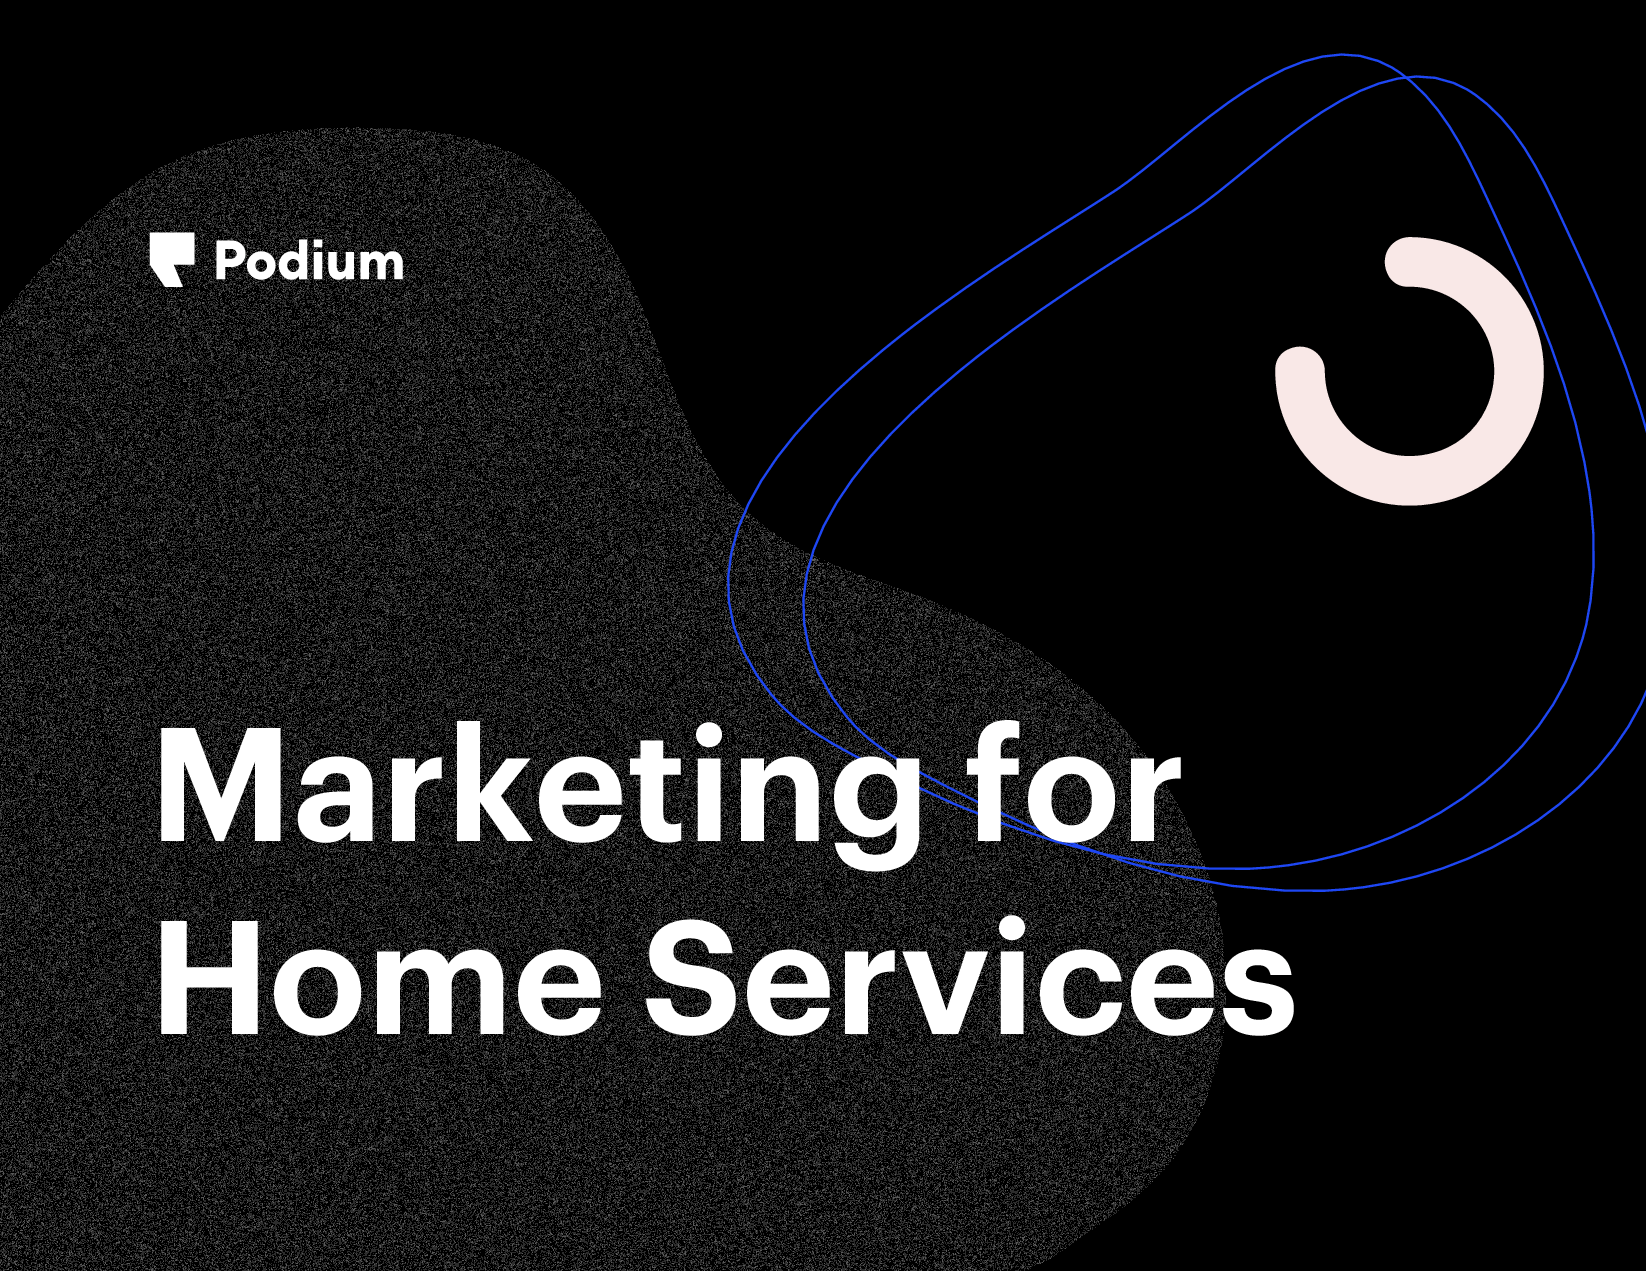 Marketing for Home Services